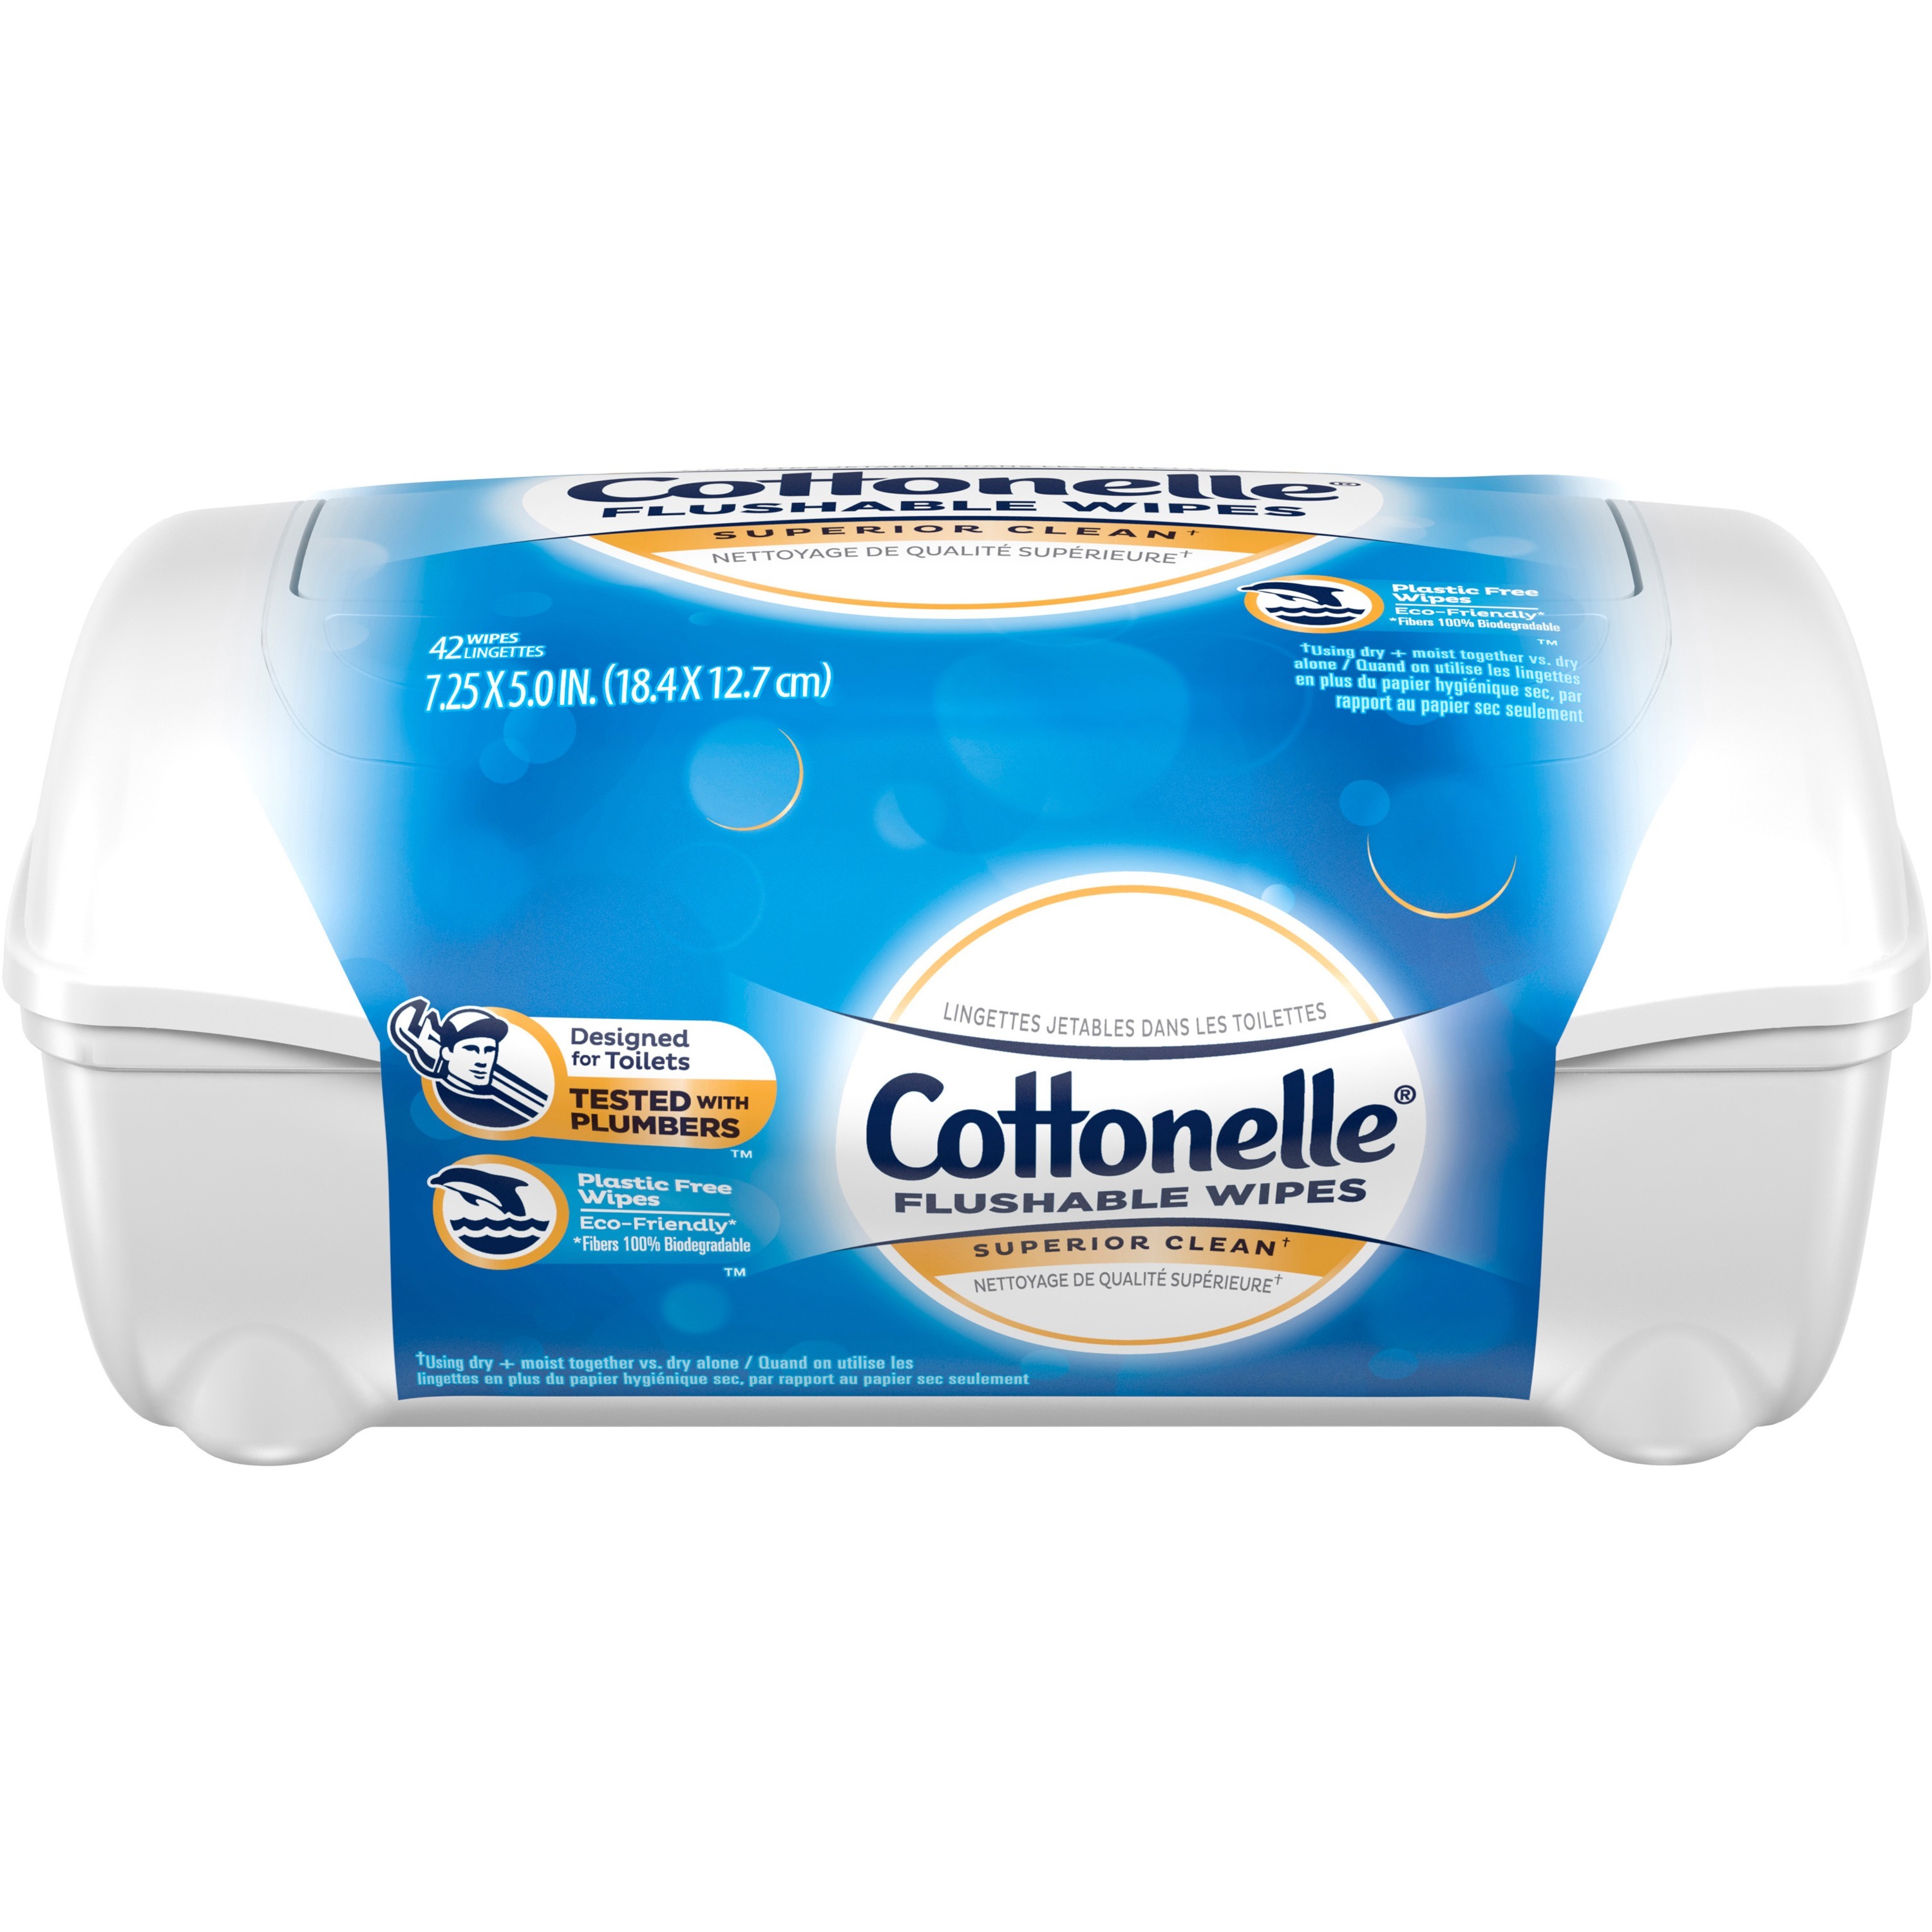 Cottonelle Flushable Wet Wipes - 7.25" x 5" - White - Flushable, Quick Drying, Alcohol-free, Sewer-safe, Septic Safe, Moisturizing - For Home, Office,